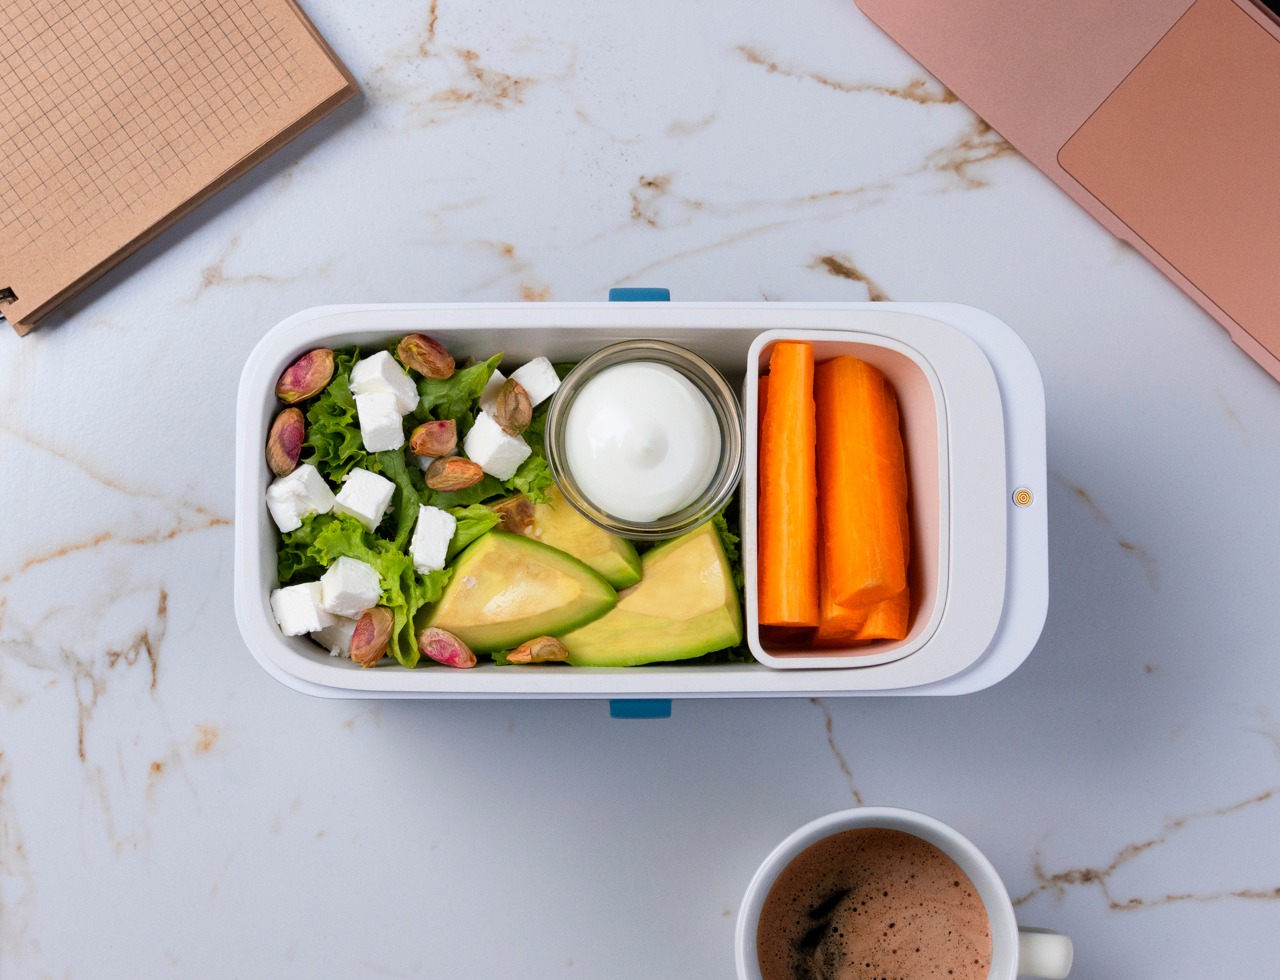 The Lunchbox That Uses Solar Power To Keep Your Food Warm Or Cold